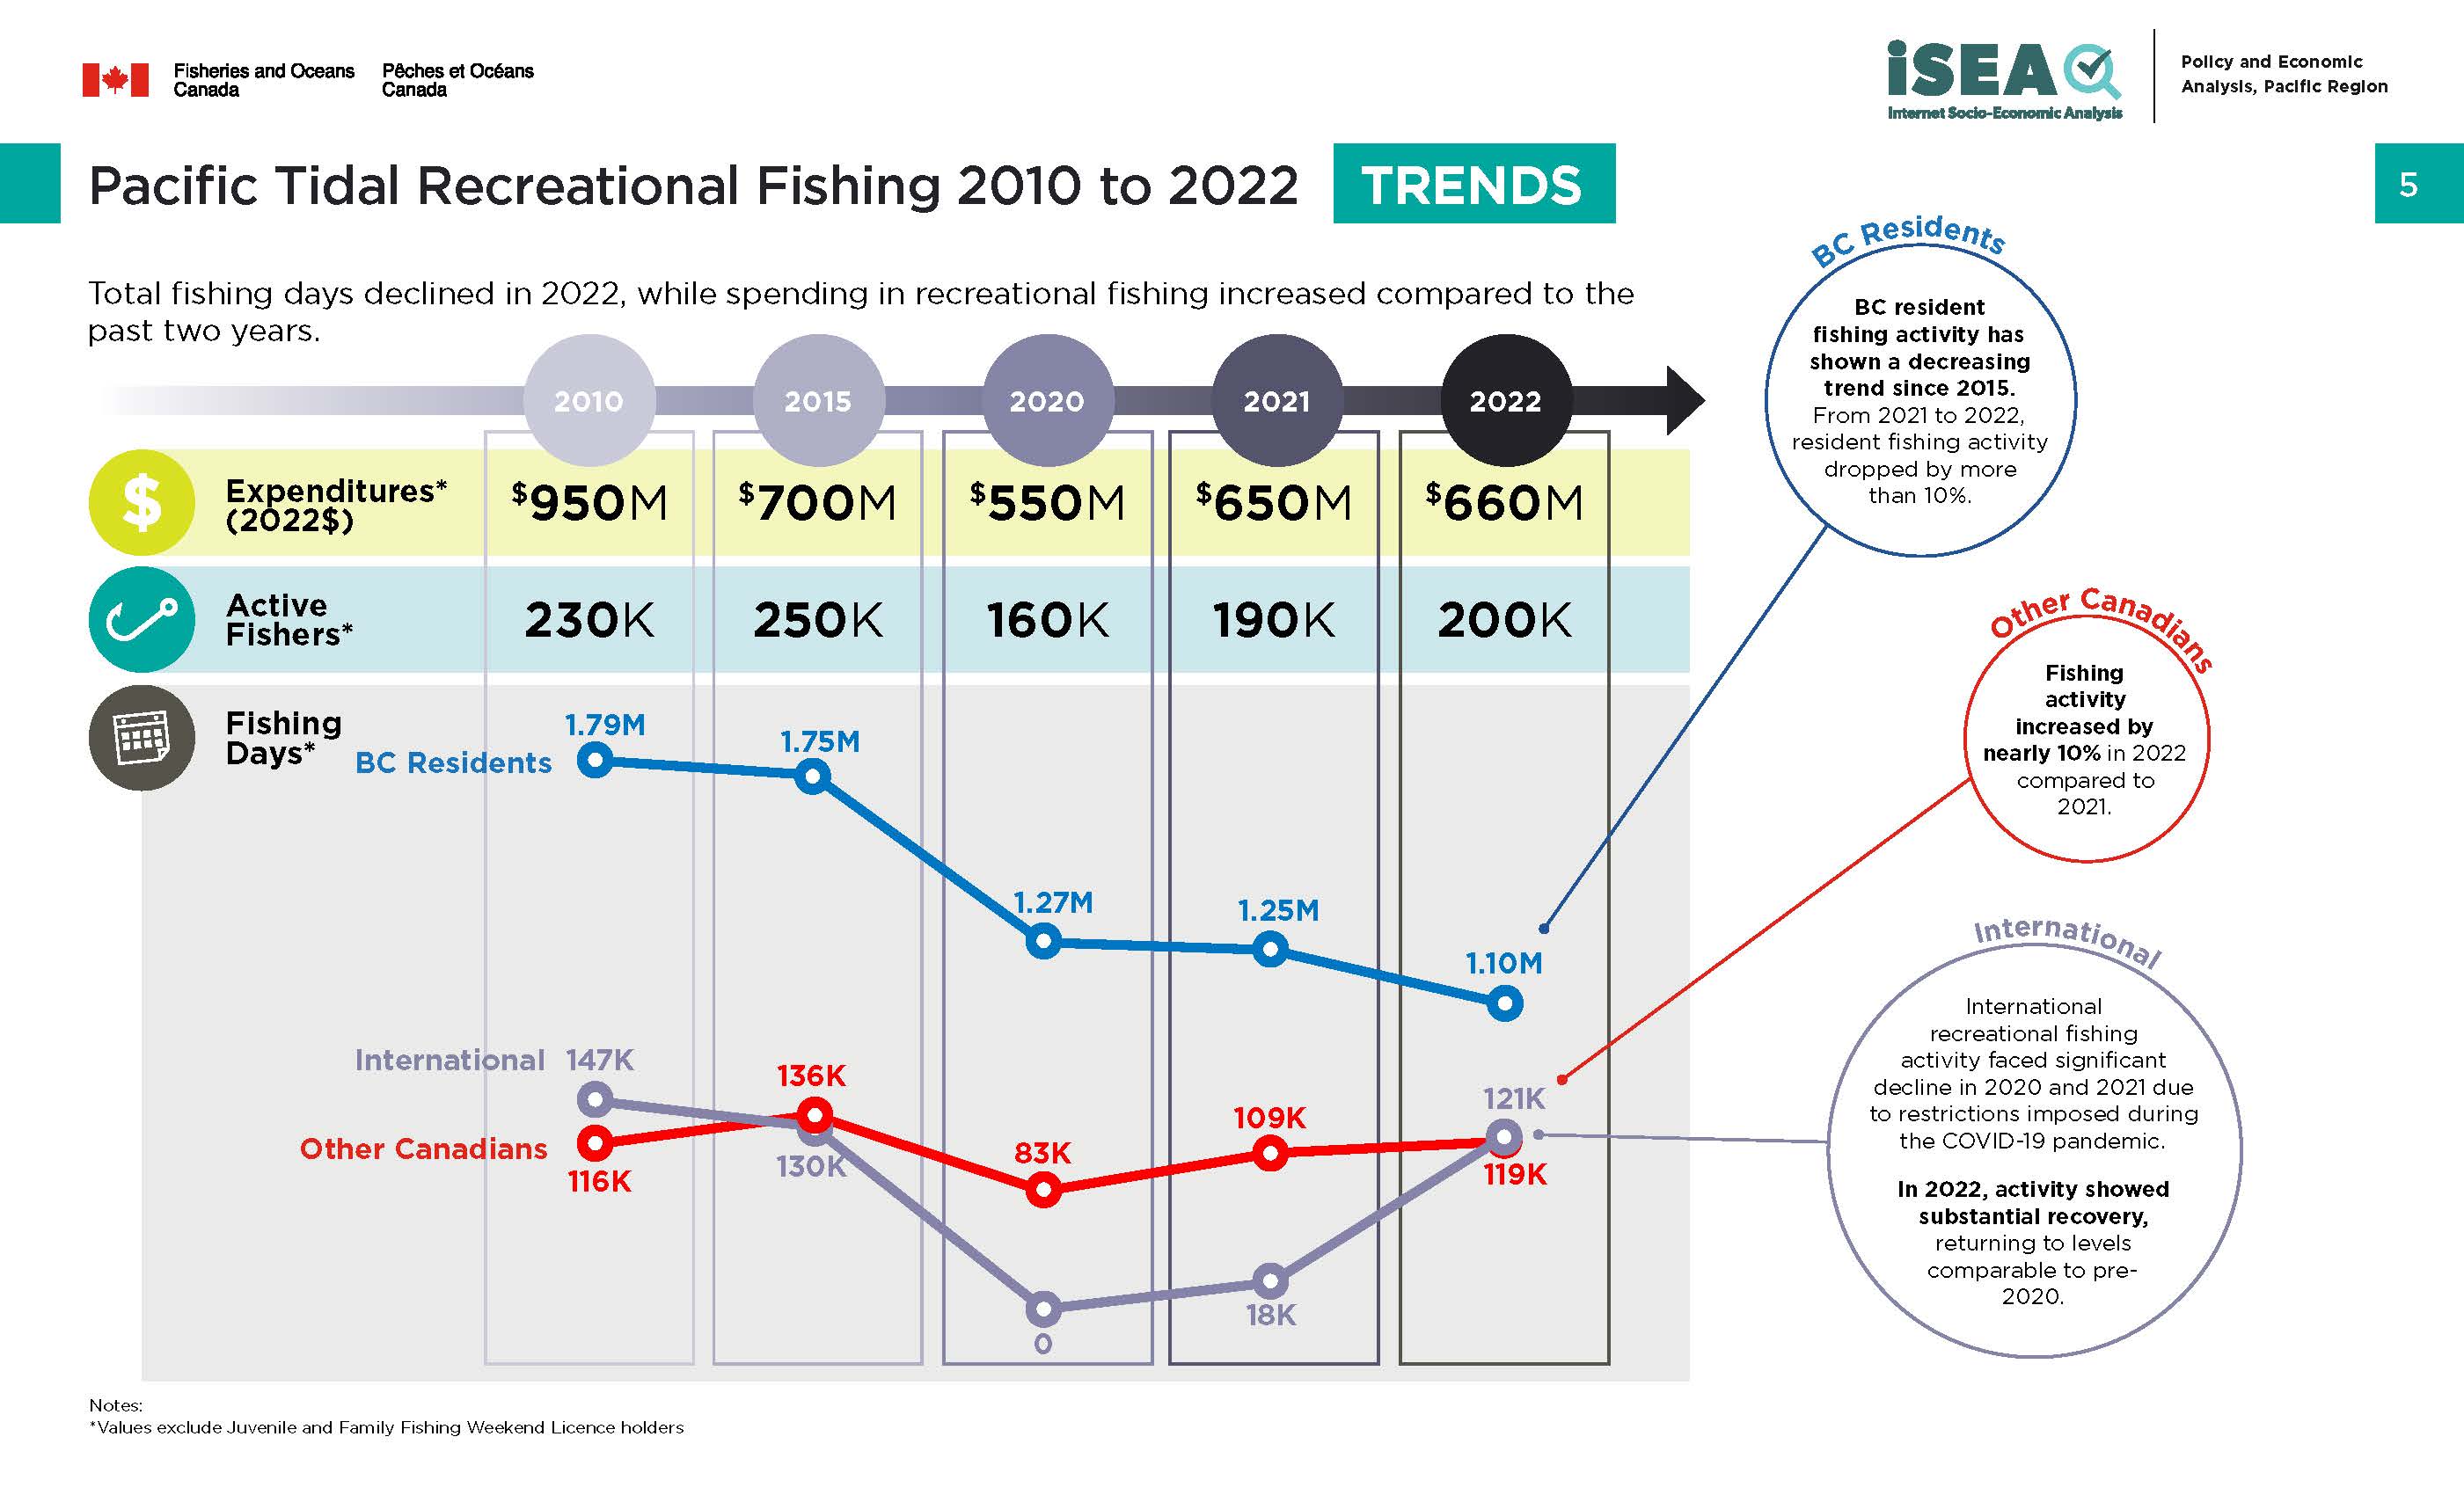 Photo: infographic of Pacific tidal recreational fishing 2000 to 2020, regions and patterns